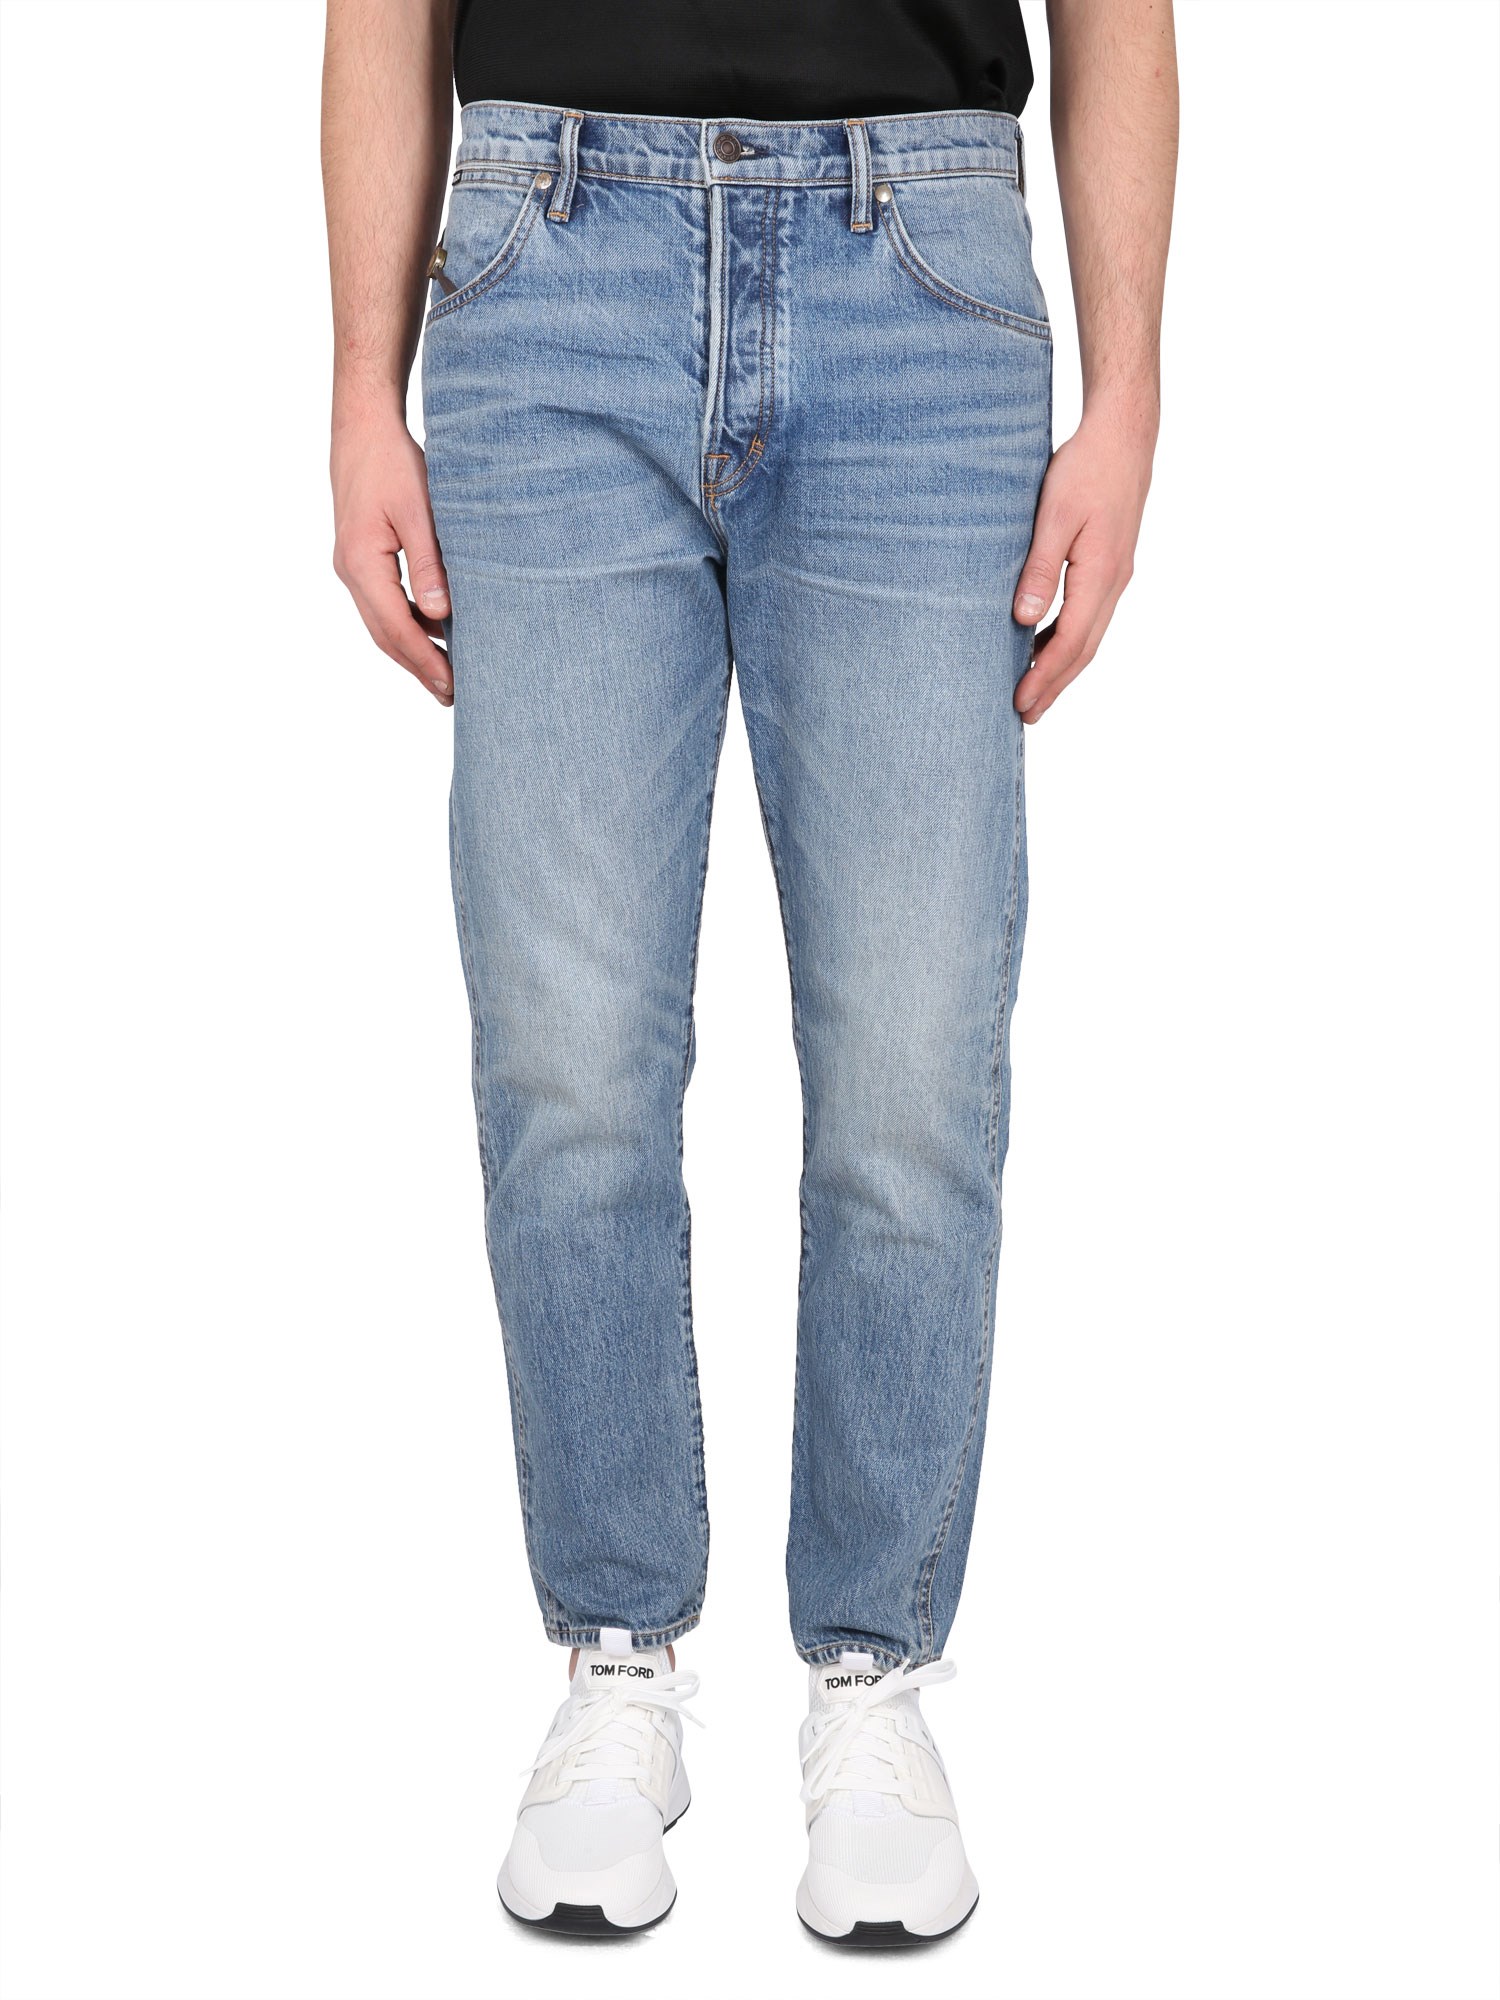 TOM FORD TAPERED FIT JEANS